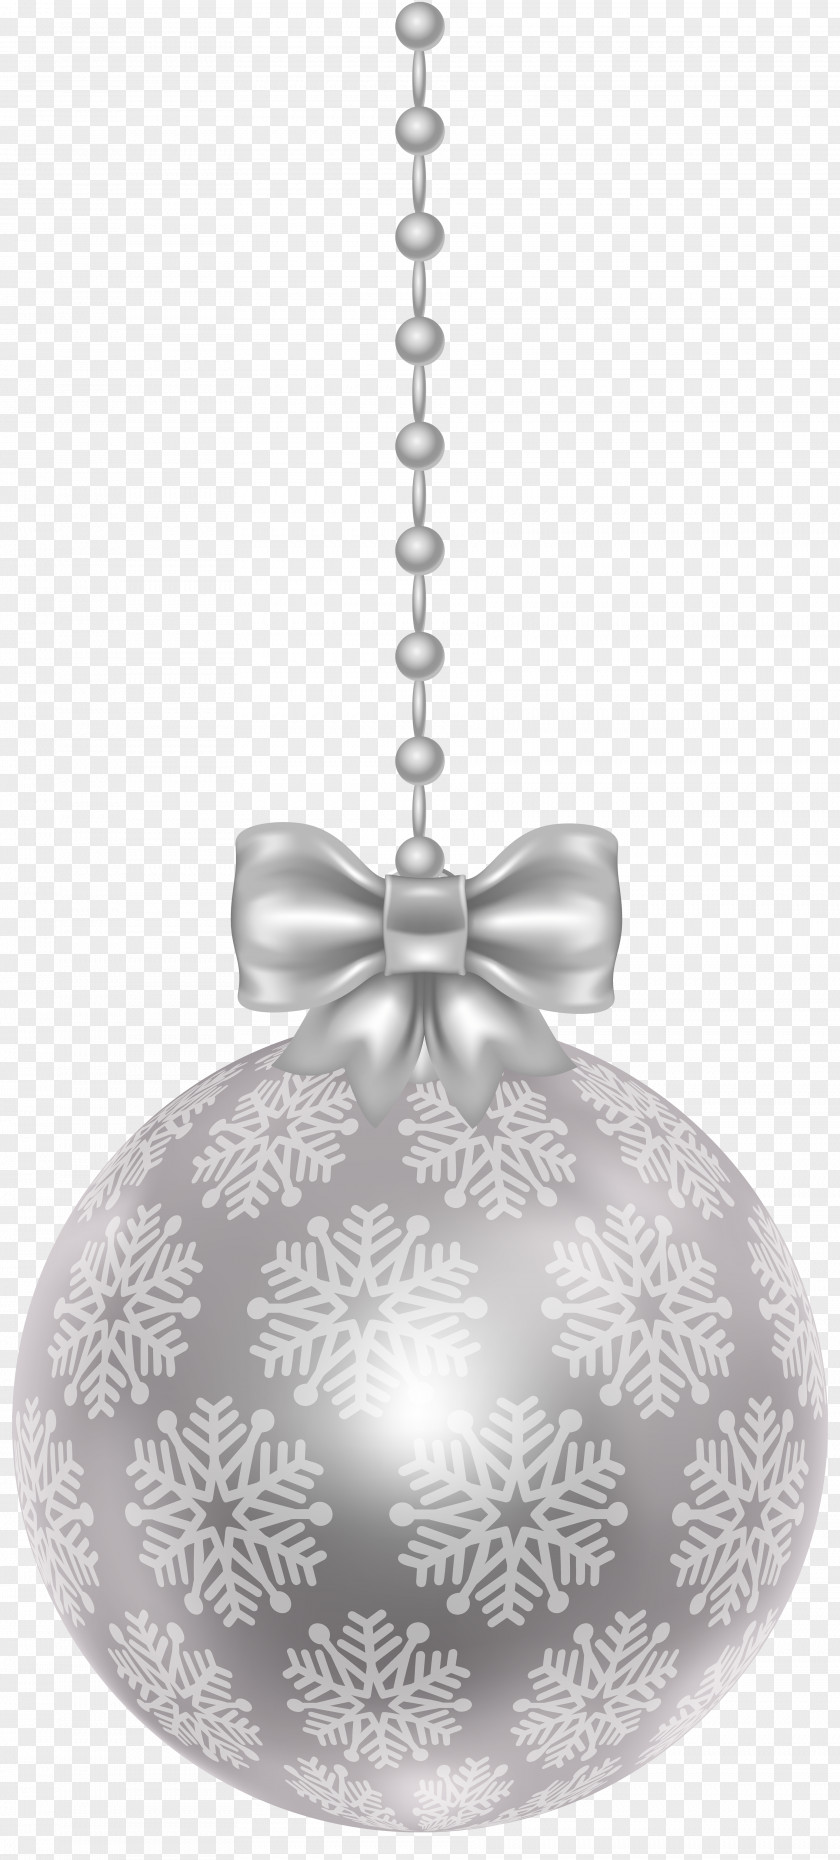 Silver Christmas Ornament Decoration White Clip Art PNG